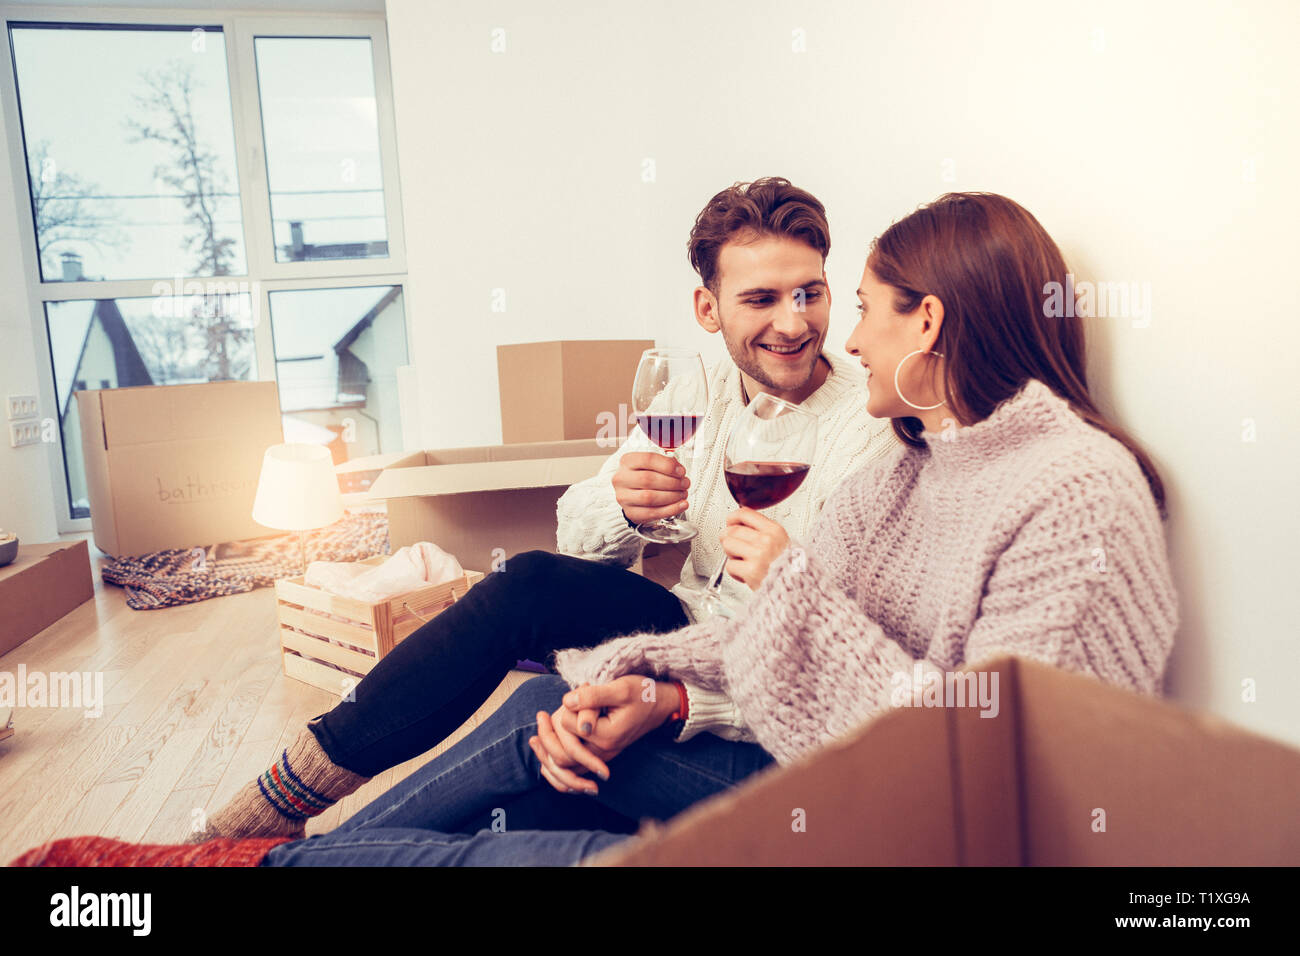 Loving husband holding hand of his wife tight while drinking wine Stock Photo